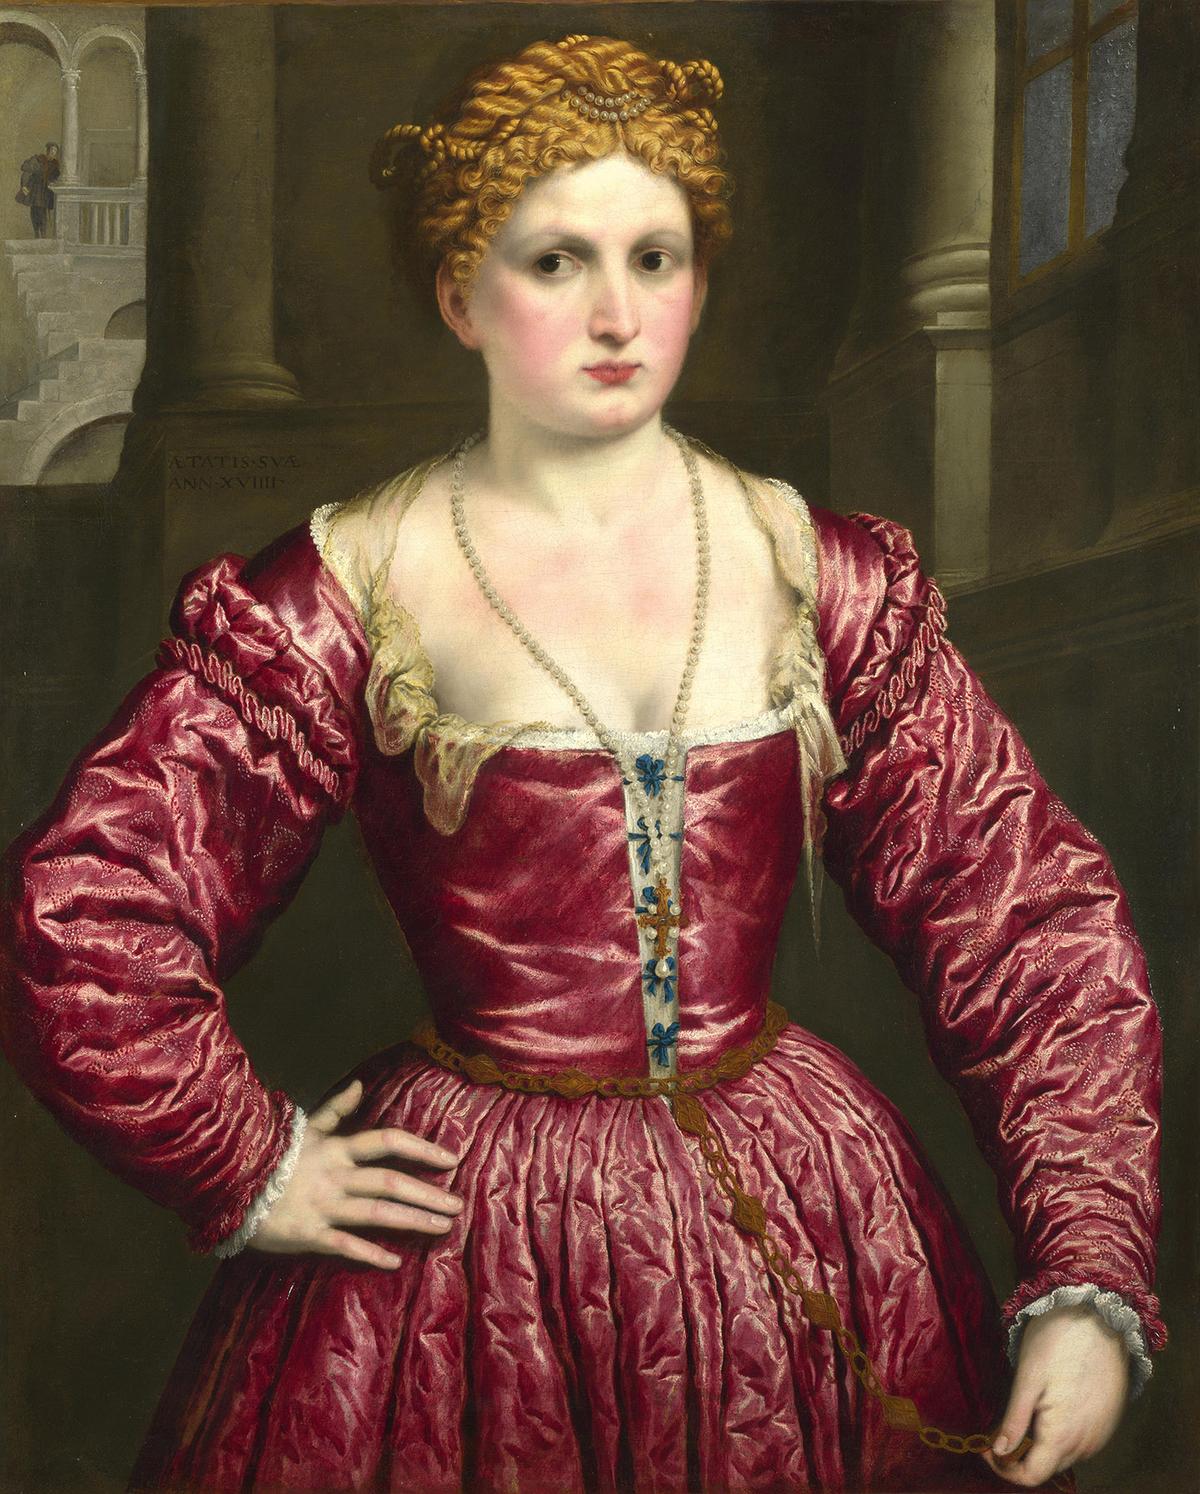 "Portrait of a Young Woman," circa 1545, by Paris Bordone. Oil on canvas; 39 7/10 inches by 32 2/5 inches. National Gallery, London. (Public Domain)